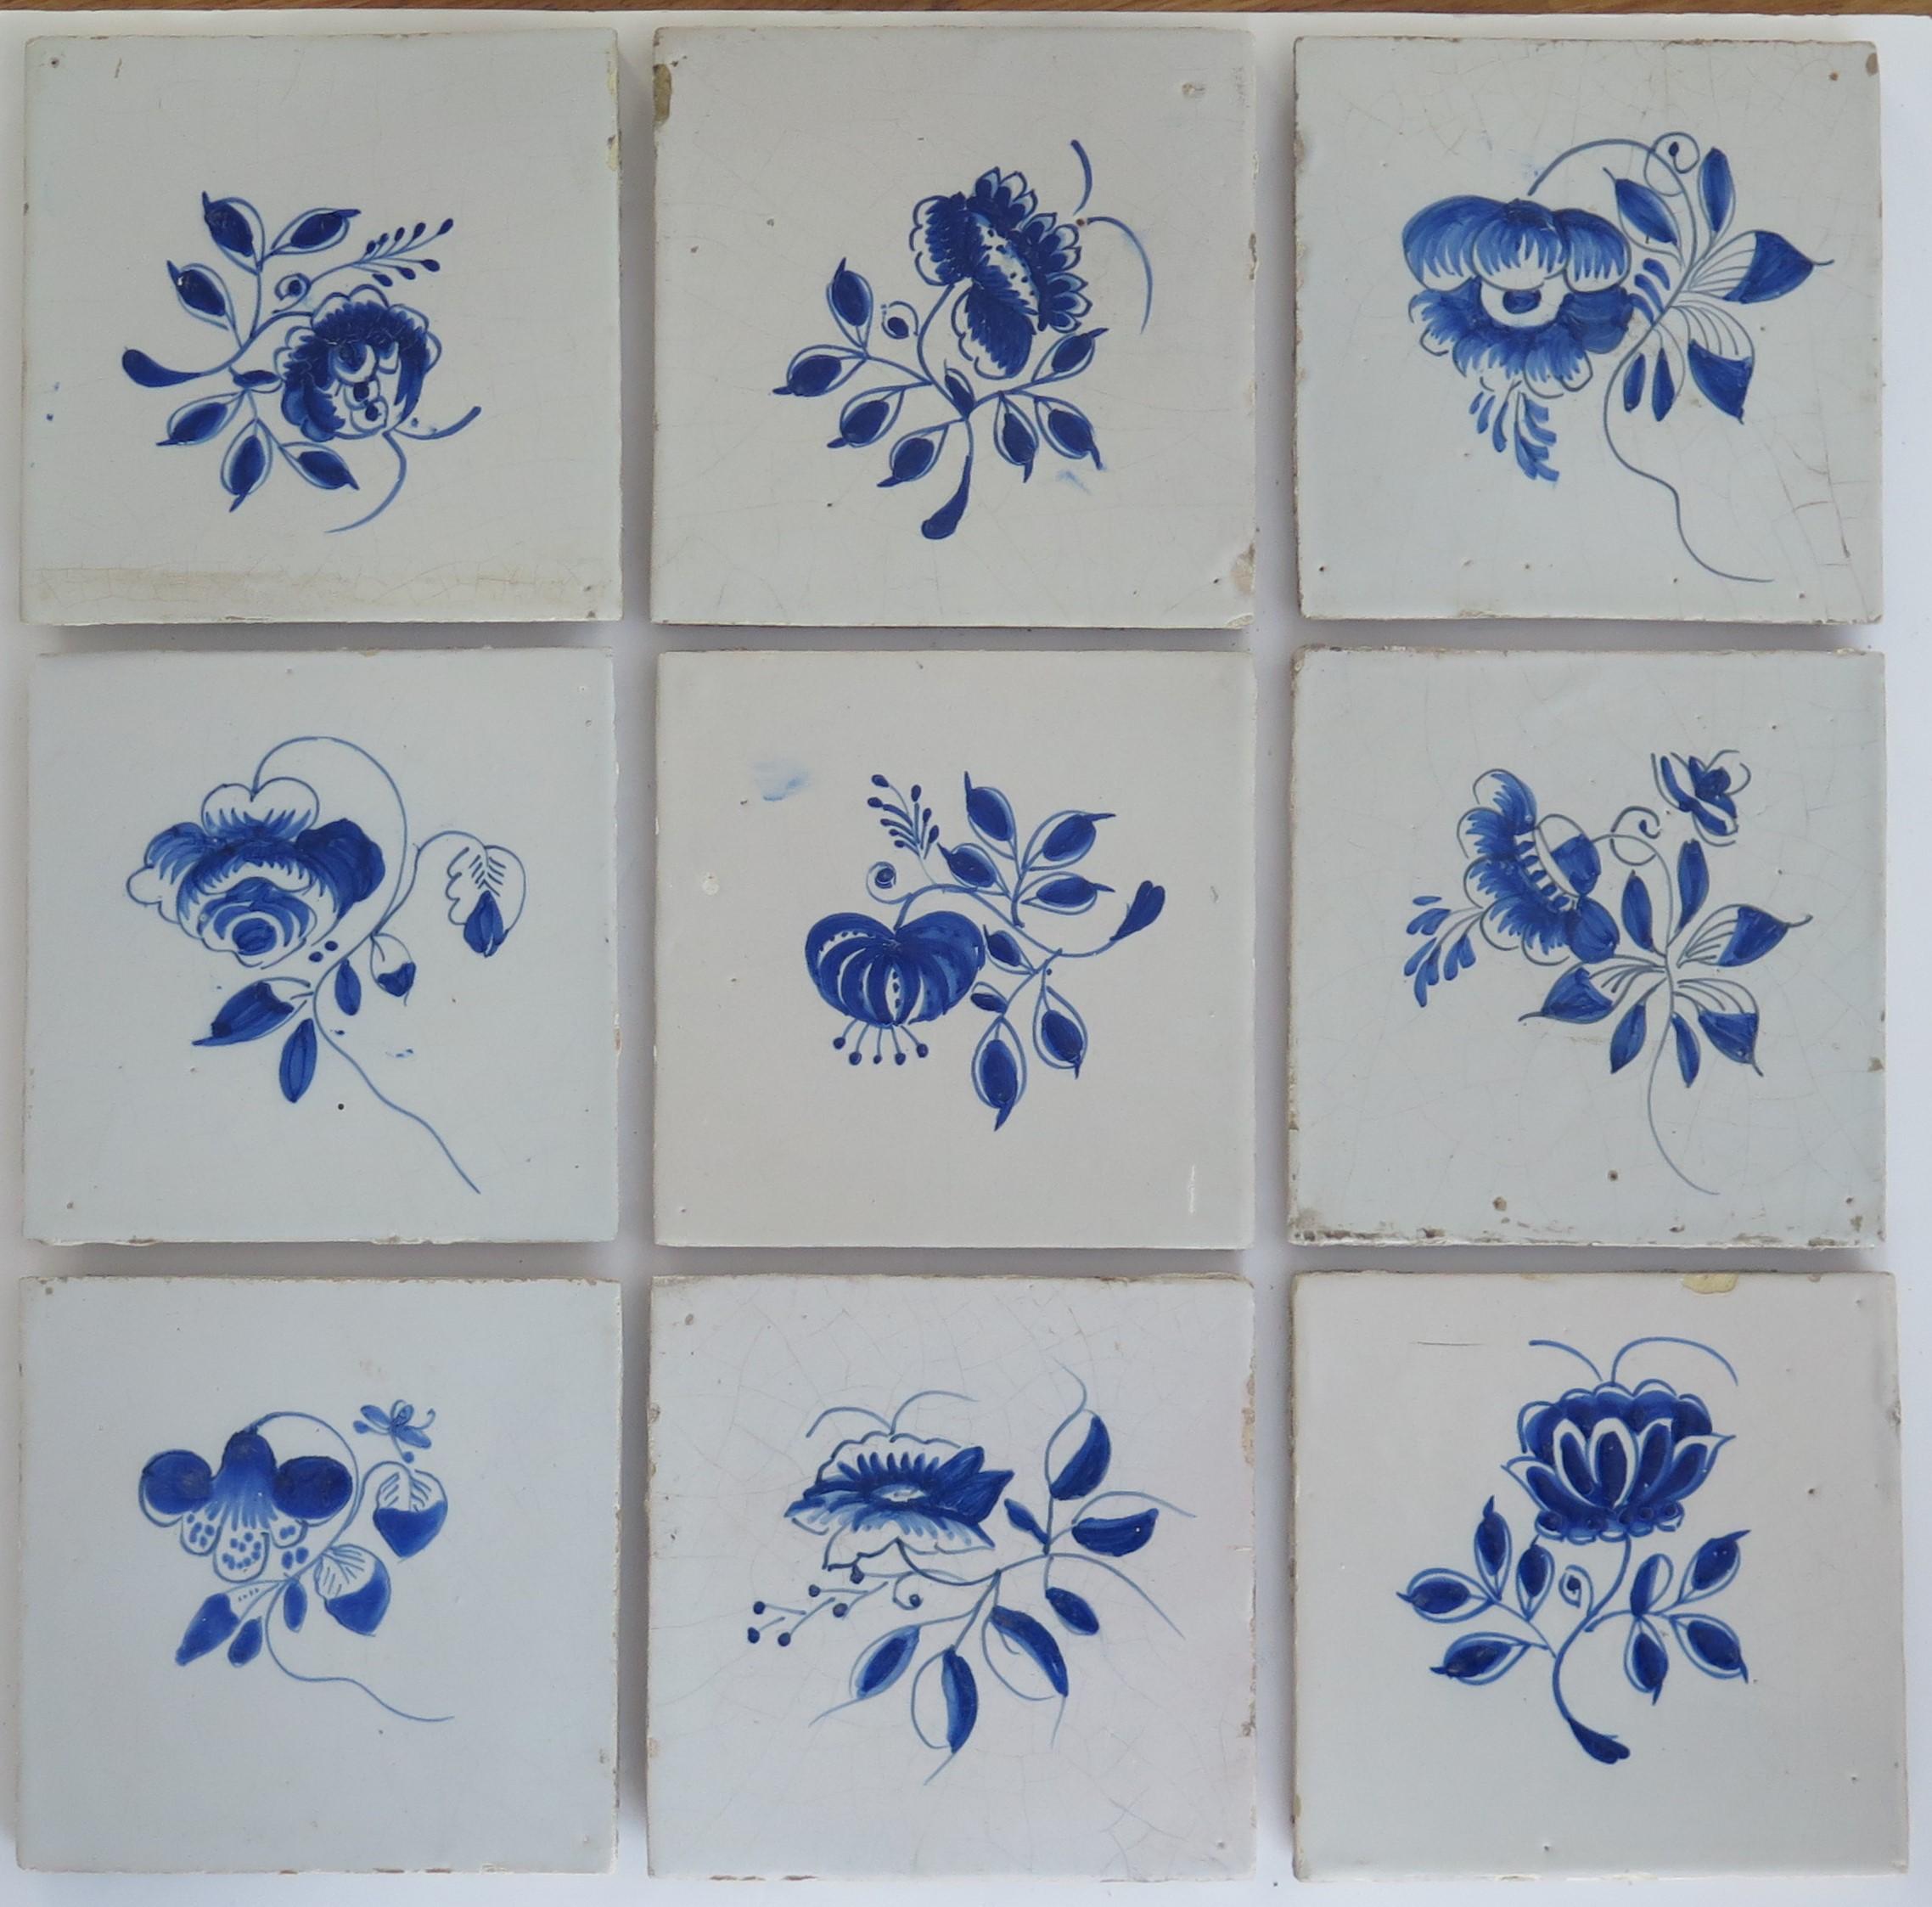 These are nine Delft ceramic wall tiles, all with a blue and white hand painted flower pattern, made in the Netherlands during the 18th century, circa 1750.

Each tile is nominally 5 inches square..

All nine tiles are unique, being individually